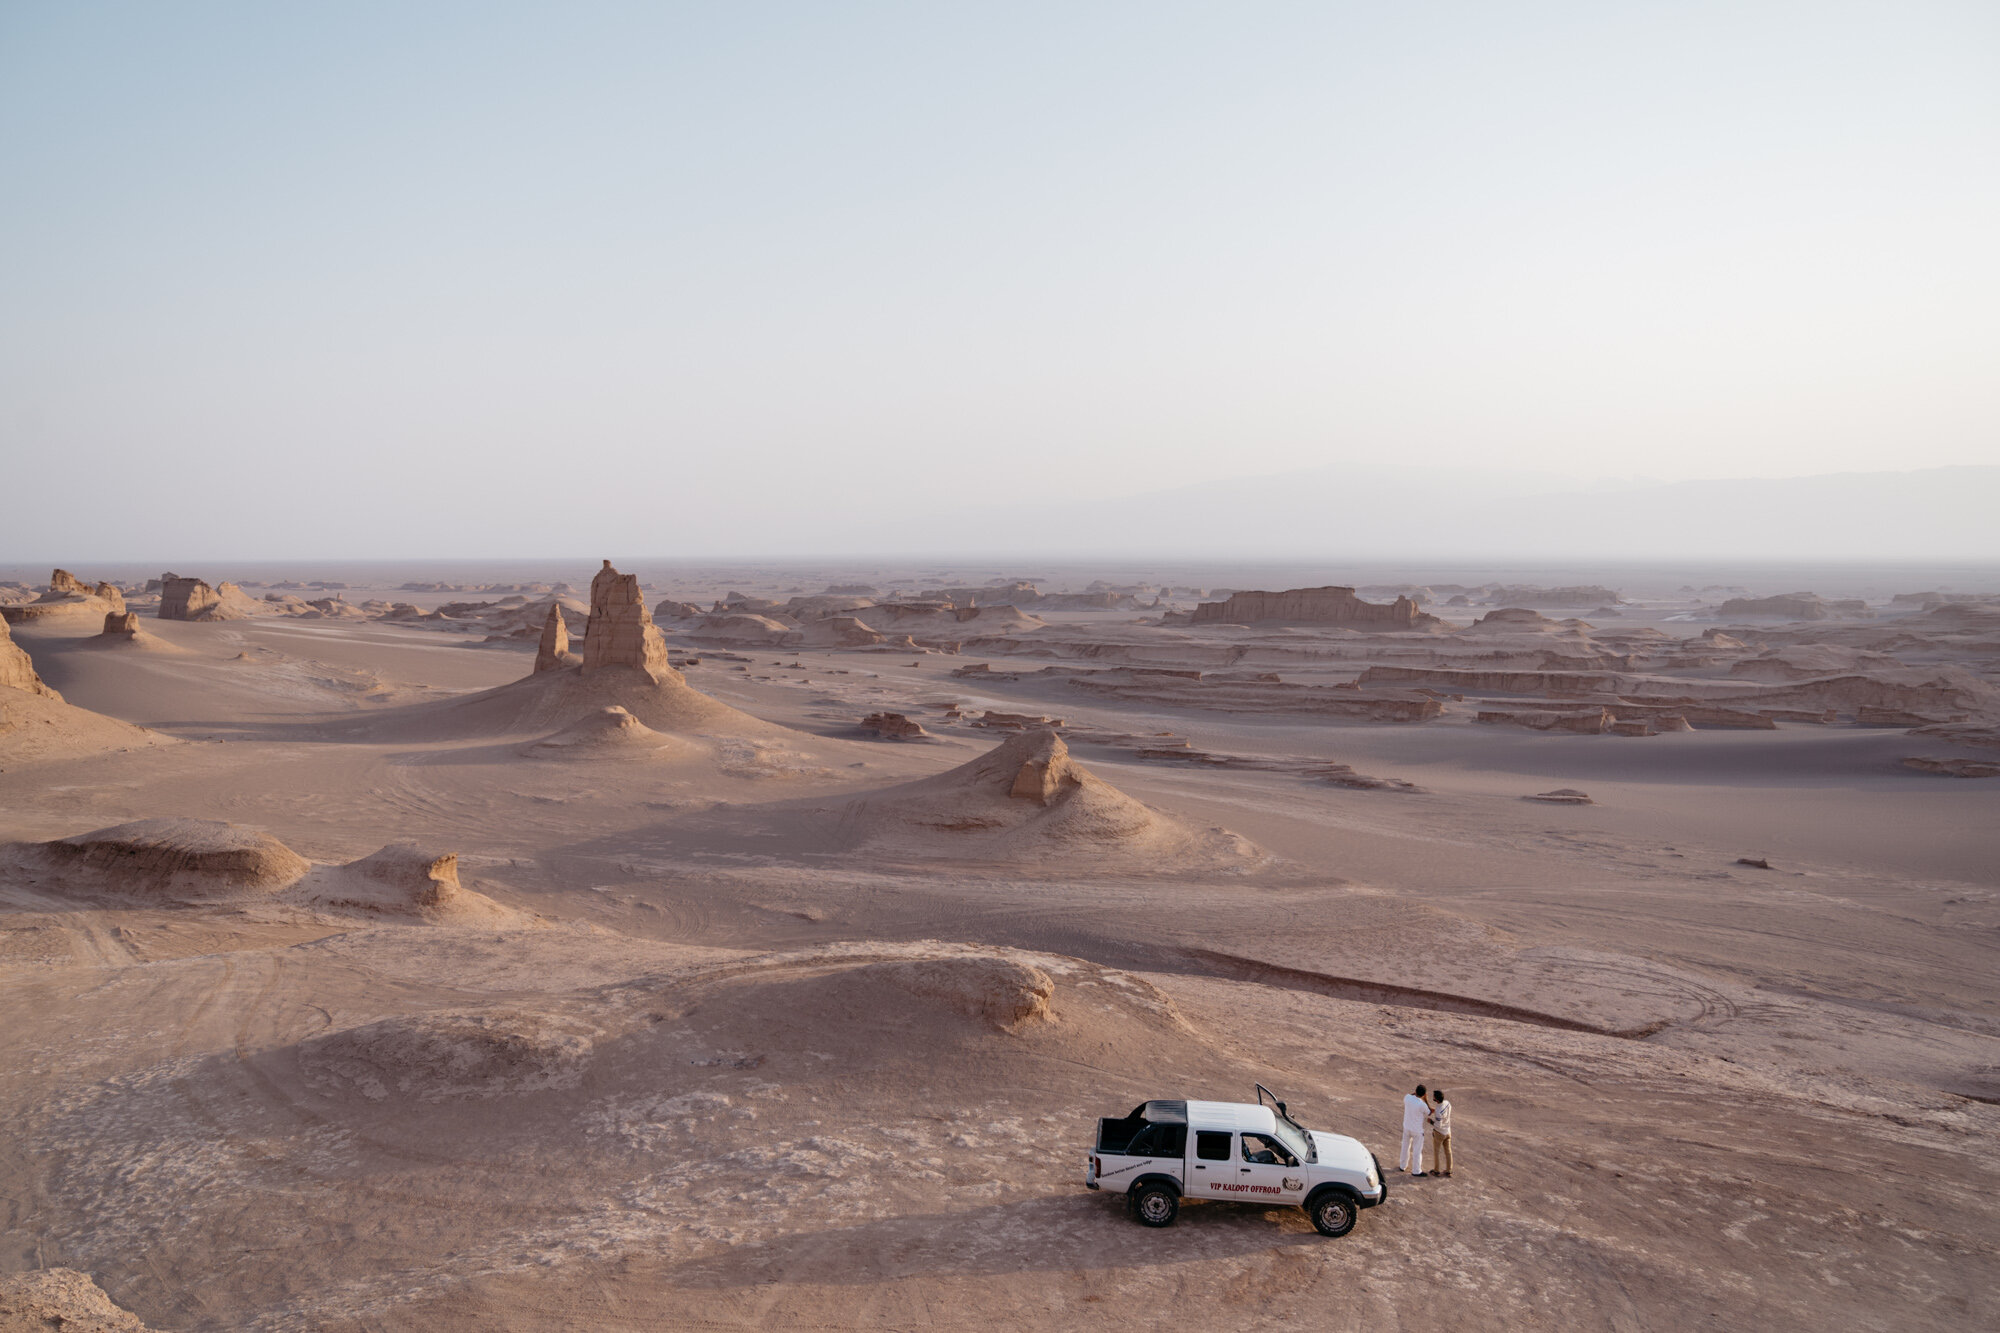  The car, or 4x4, has allowed people to reach much further into the desert 